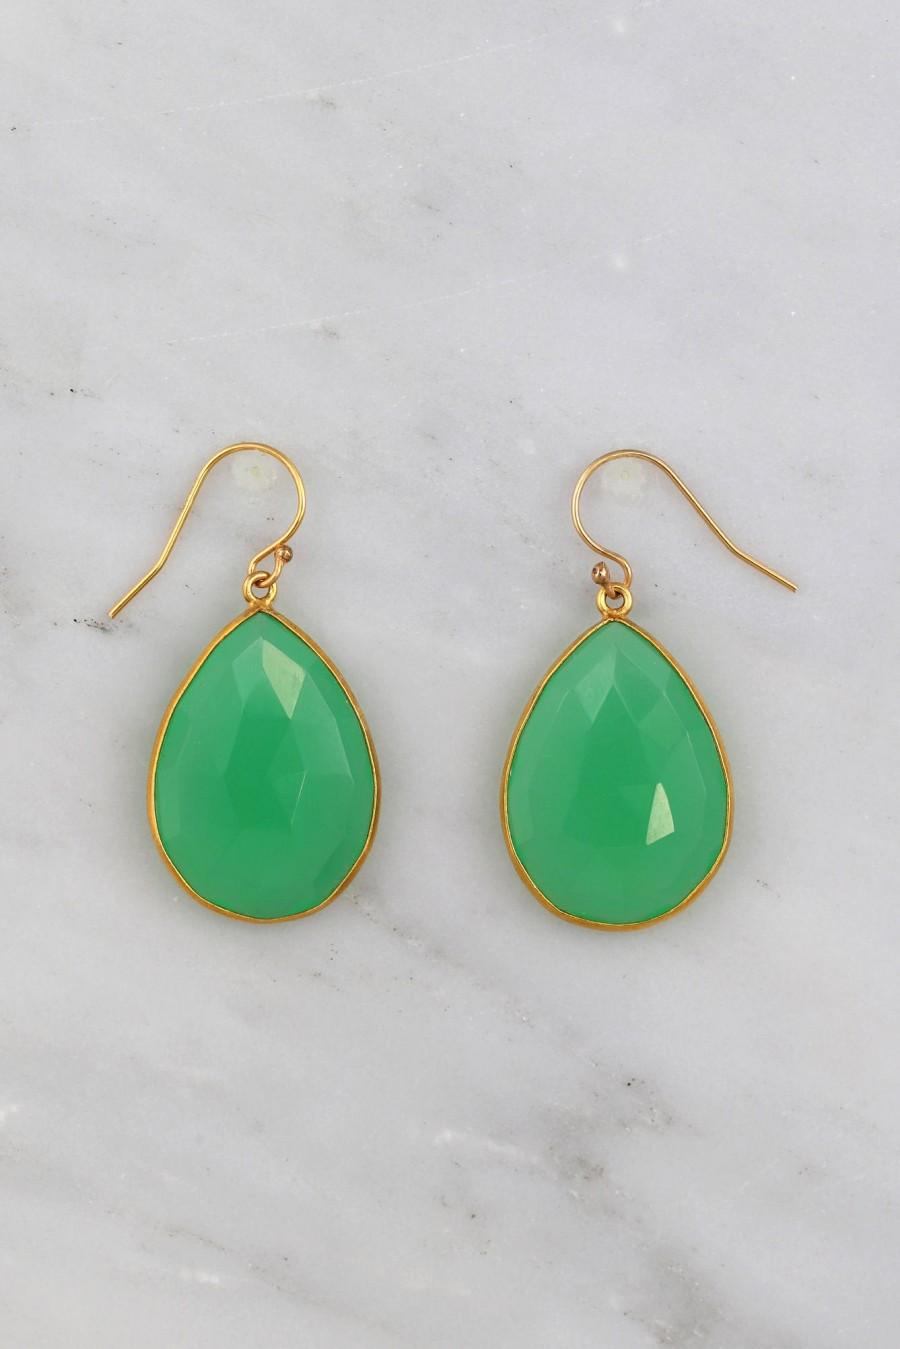 Hochzeit - Chrysoprase Earring, Drop and Dangle Earring, Green Gemstone Earring, Gold filled wires Earring, Large Gemstone Earring, Elegant Earring